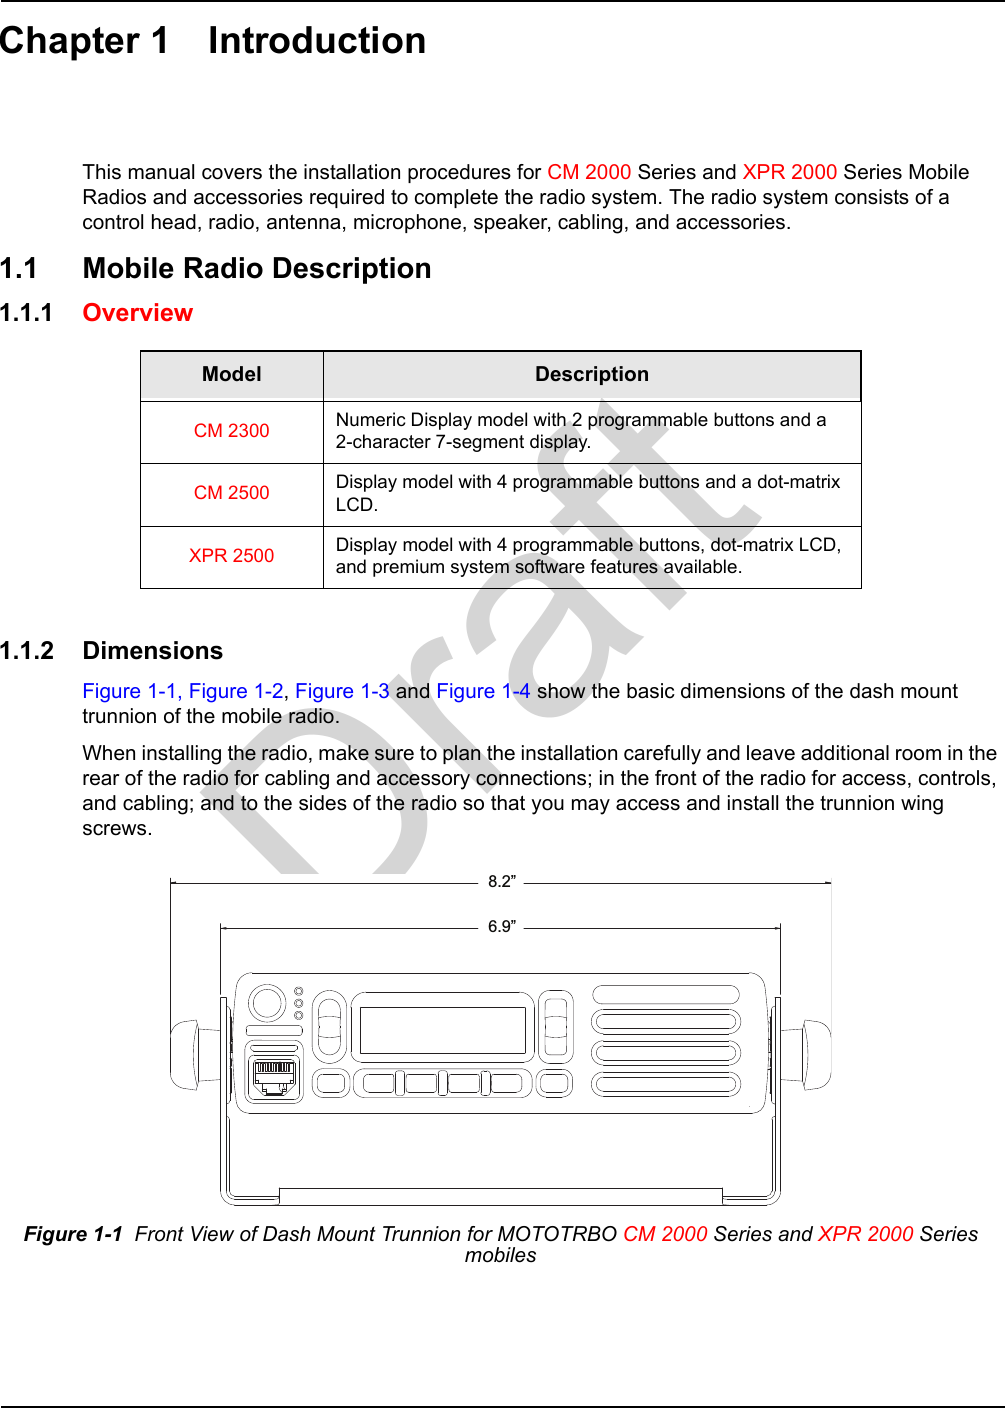 DraftChapter 1 IntroductionThis manual covers the installation procedures for CM 2000 Series and XPR 2000 Series Mobile Radios and accessories required to complete the radio system. The radio system consists of a control head, radio, antenna, microphone, speaker, cabling, and accessories. 1.1 Mobile Radio Description1.1.1 Overview 1.1.2 DimensionsFigure 1-1, Figure 1-2, Figure 1-3 and Figure 1-4 show the basic dimensions of the dash mount trunnion of the mobile radio.When installing the radio, make sure to plan the installation carefully and leave additional room in the rear of the radio for cabling and accessory connections; in the front of the radio for access, controls, and cabling; and to the sides of the radio so that you may access and install the trunnion wing screws.Model DescriptionCM 2300 Numeric Display model with 2 programmable buttons and a  2-character 7-segment display.CM 2500 Display model with 4 programmable buttons and a dot-matrix LCD.XPR 2500 Display model with 4 programmable buttons, dot-matrix LCD, and premium system software features available.Figure 1-1  Front View of Dash Mount Trunnion for MOTOTRBO CM 2000 Series and XPR 2000 Series mobiles8.2”6.9”